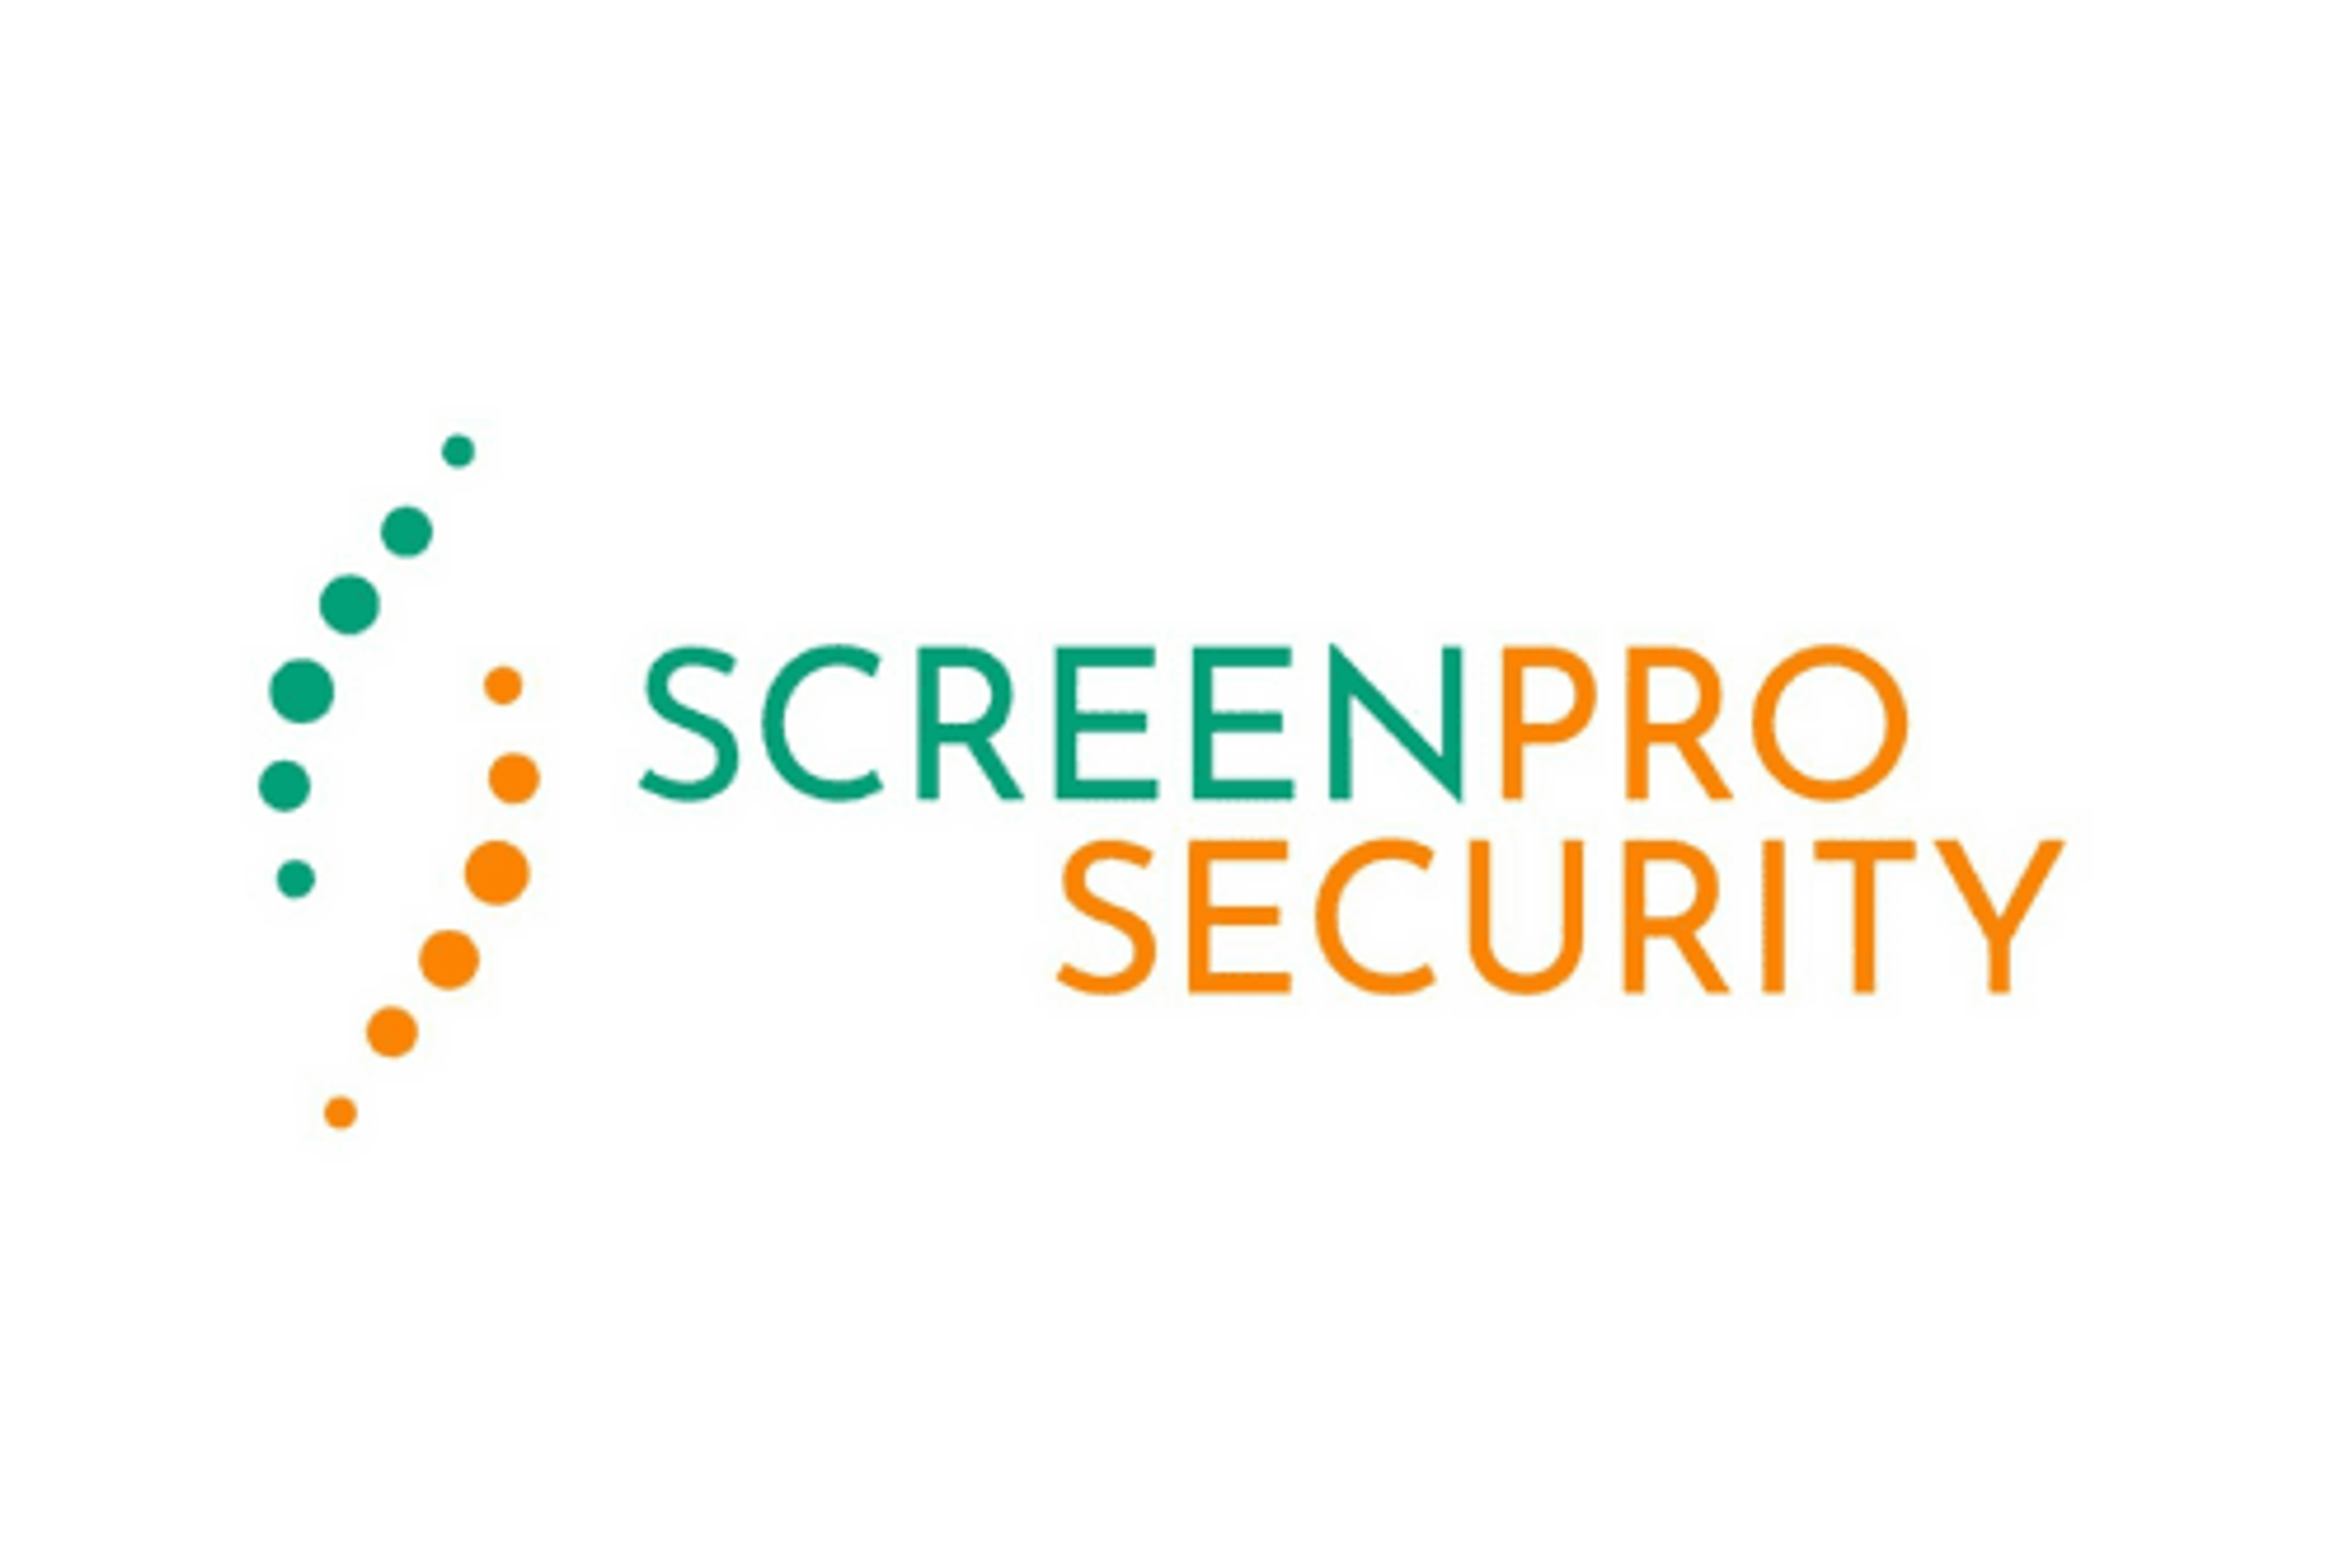 ScreenPro's Film and Production Clients Increased Testing to 300 %